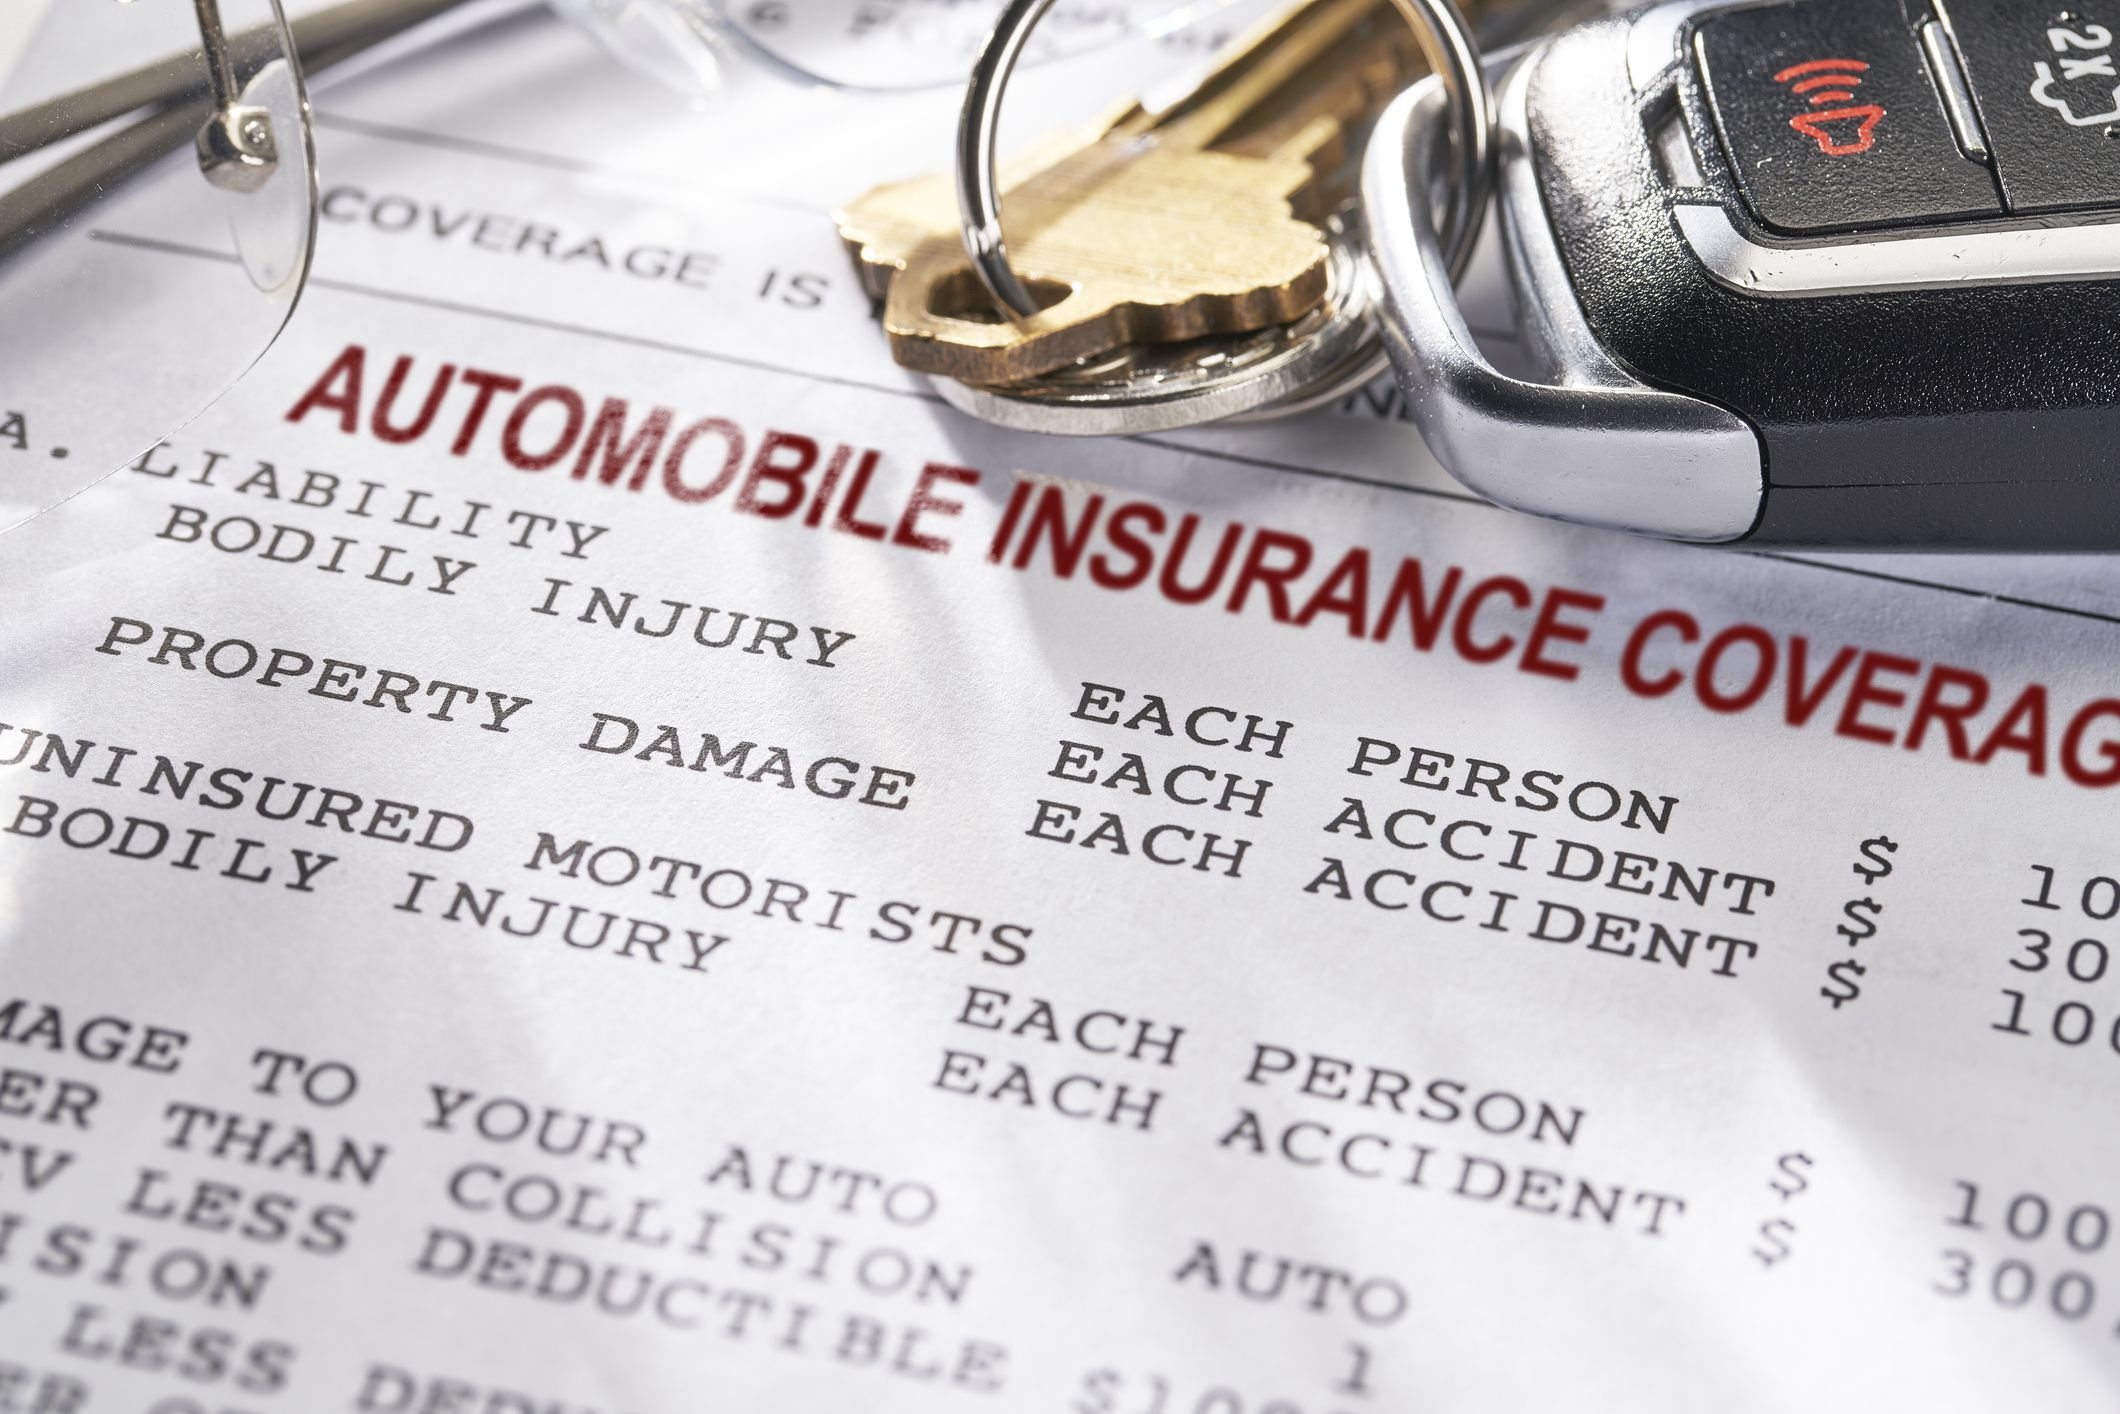 15 Tips And Ideas For Cutting Car Insurance Costs within dimensions 2120 X 1414